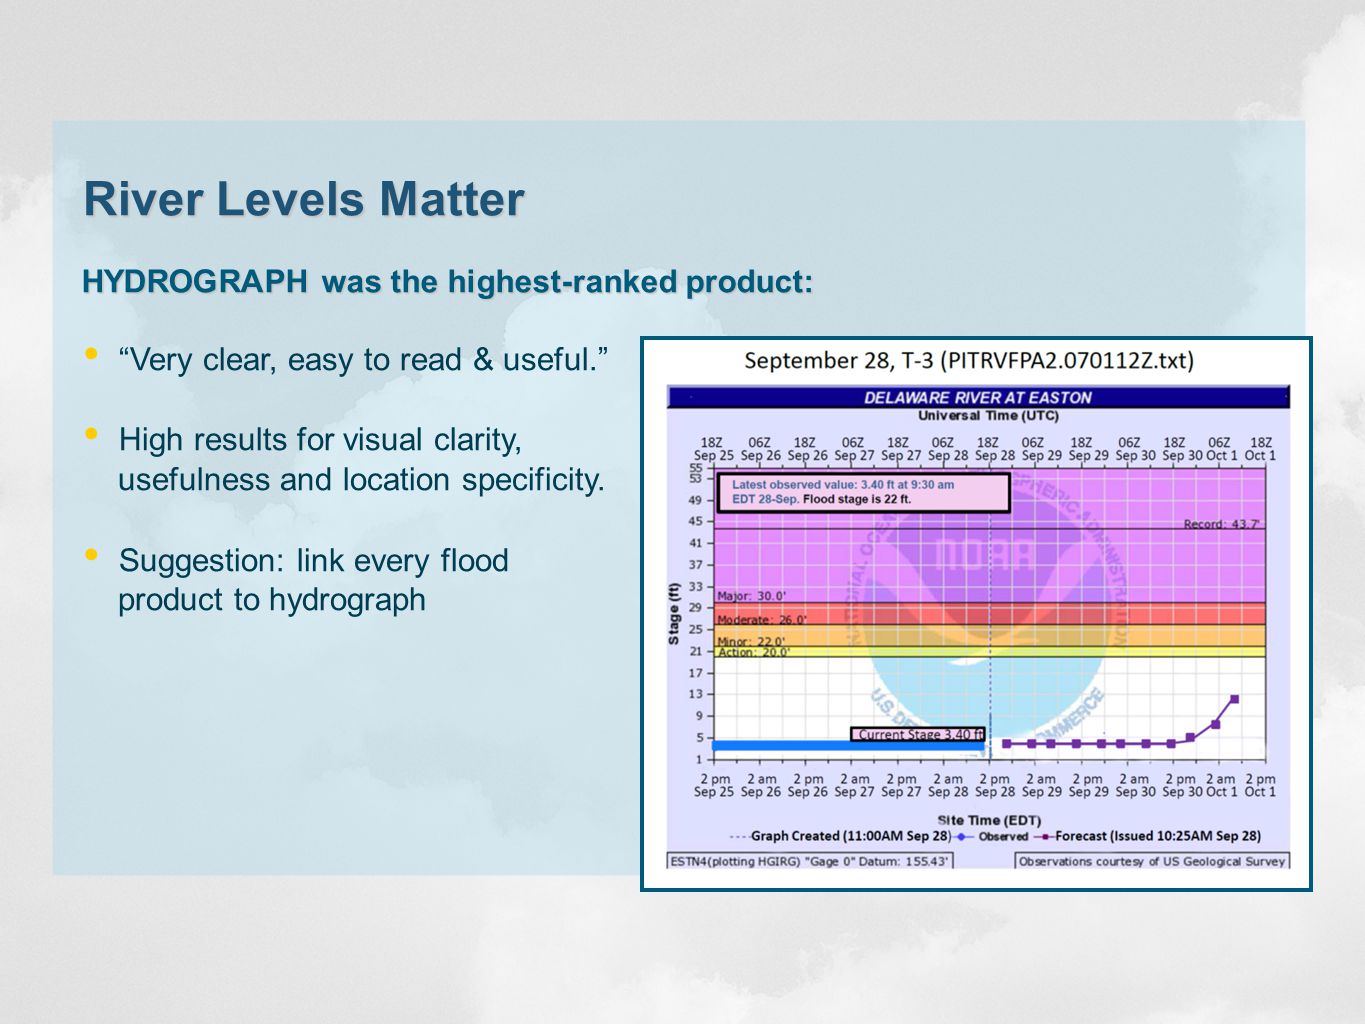 River Levels Matter HYDROGRAPH was the highest-ranked product: Very clear, easy to read & useful. High results for visual clarity, usefulness and location specificity.